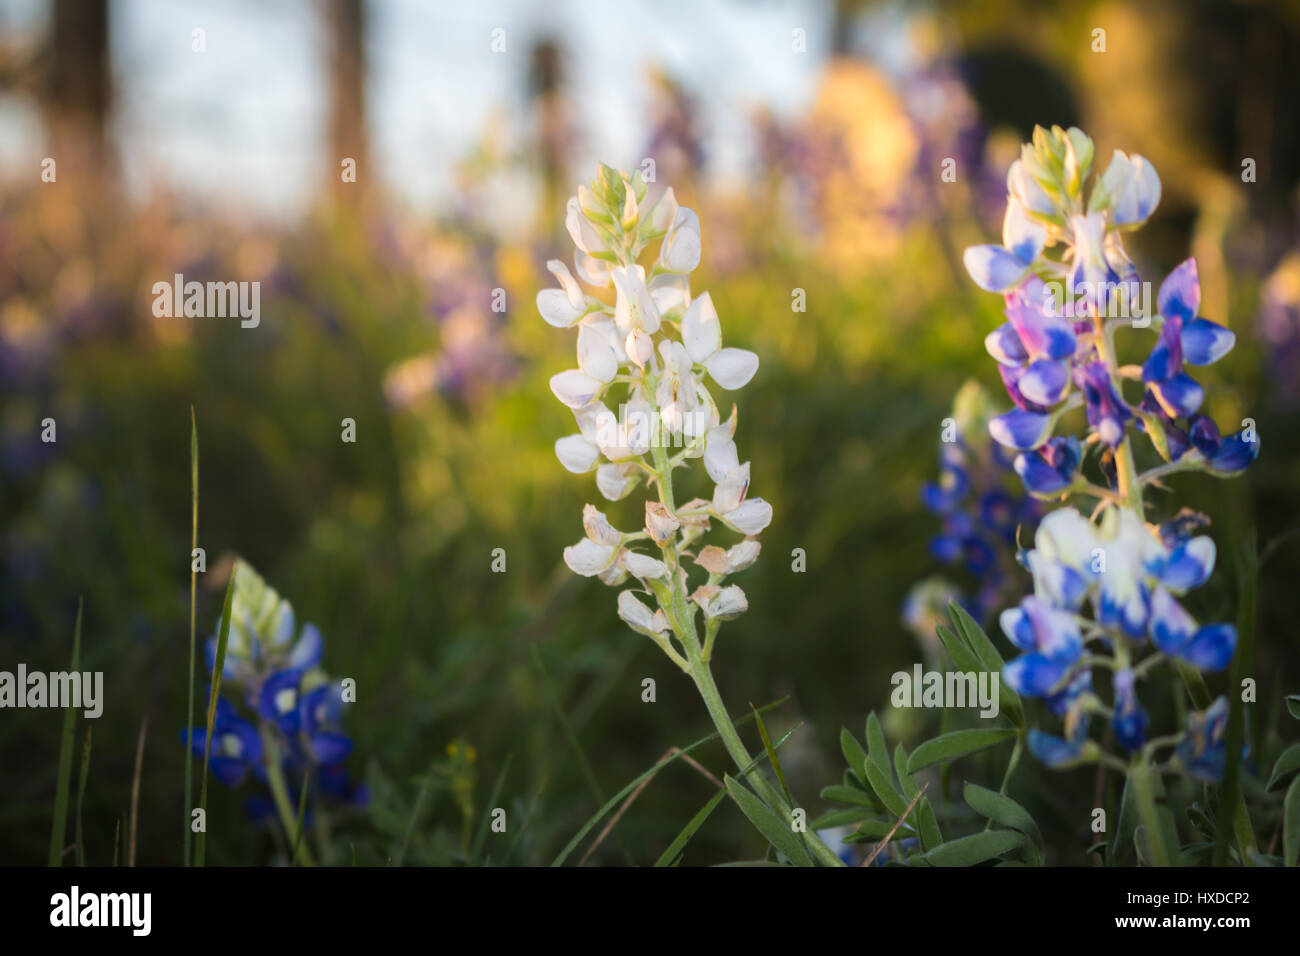 Back-lit bluebonnets near Brownwood Texas. Bluebonnets are a staple in Texas and a white bluebonnet  is rare and such a sight to see amongst the blue. Stock Photo